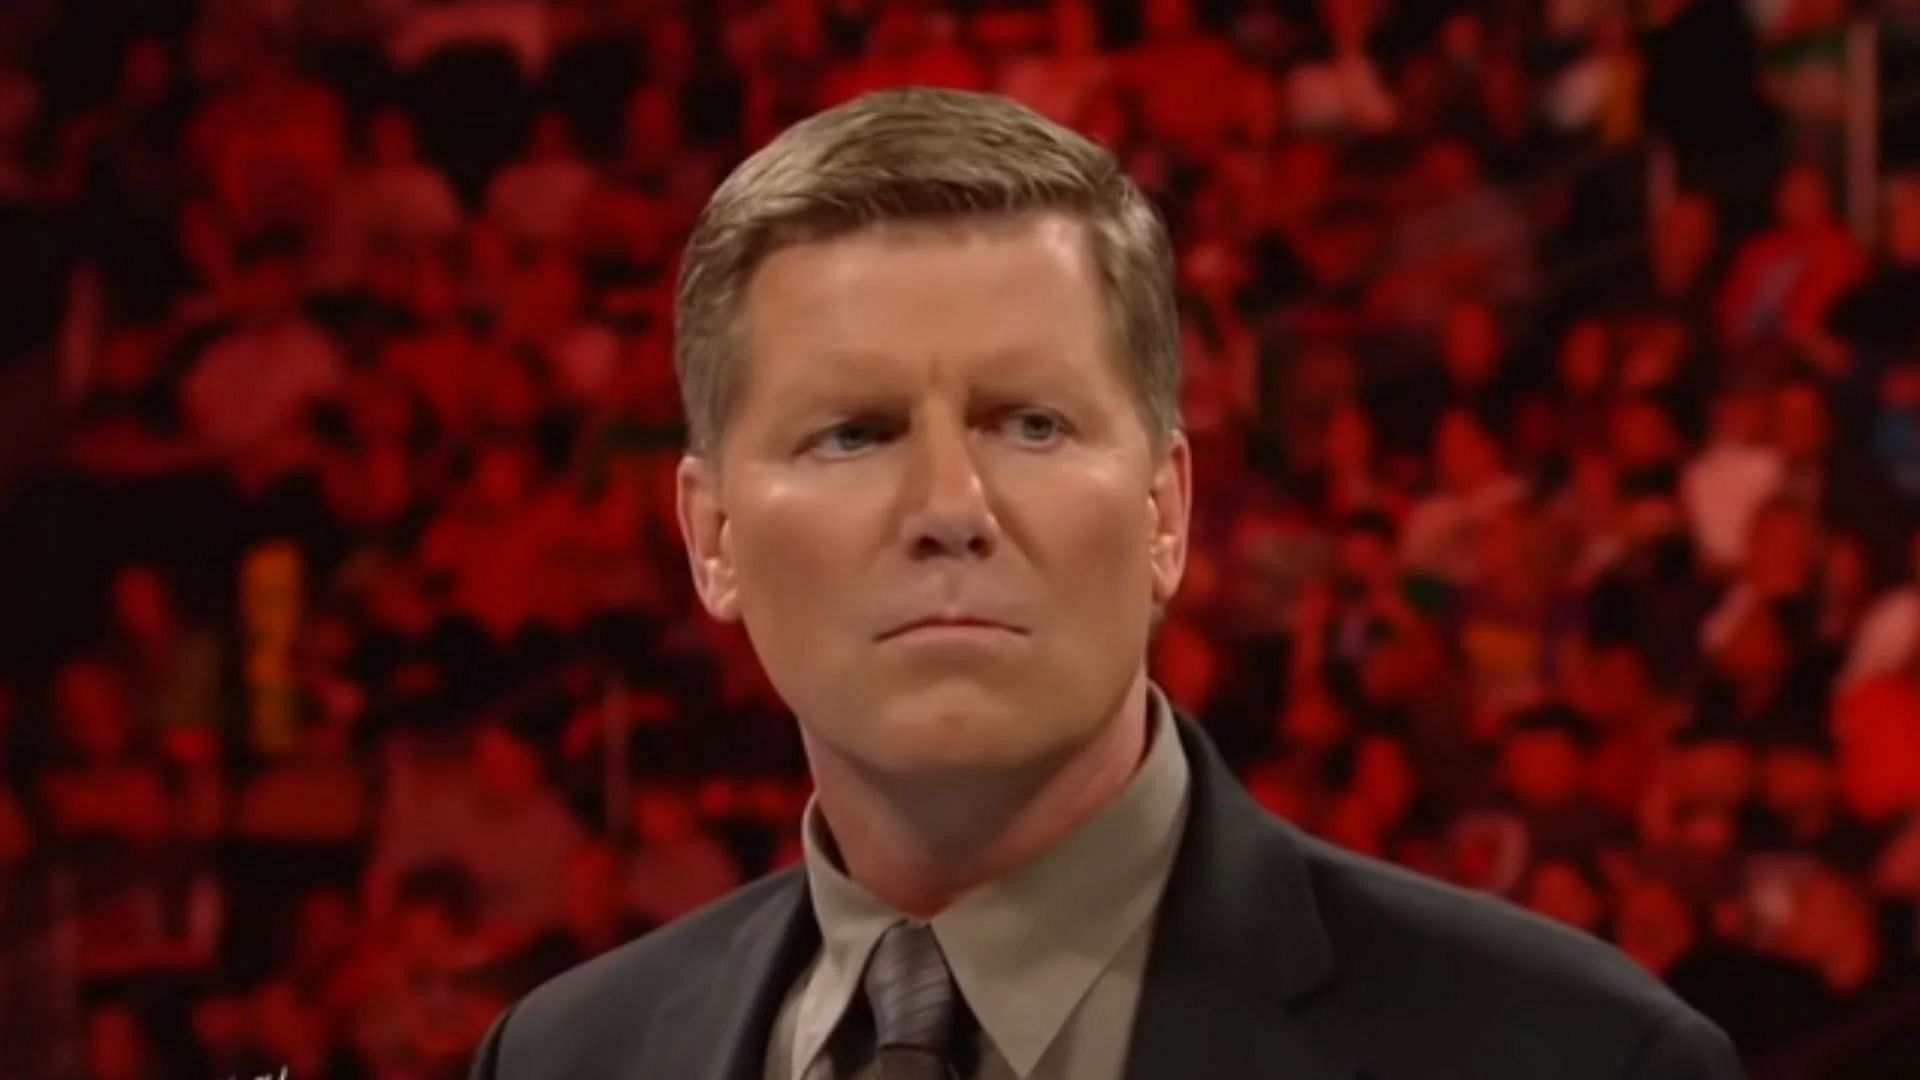 John Laurinaitis was the Head of Talent Relations in WWE